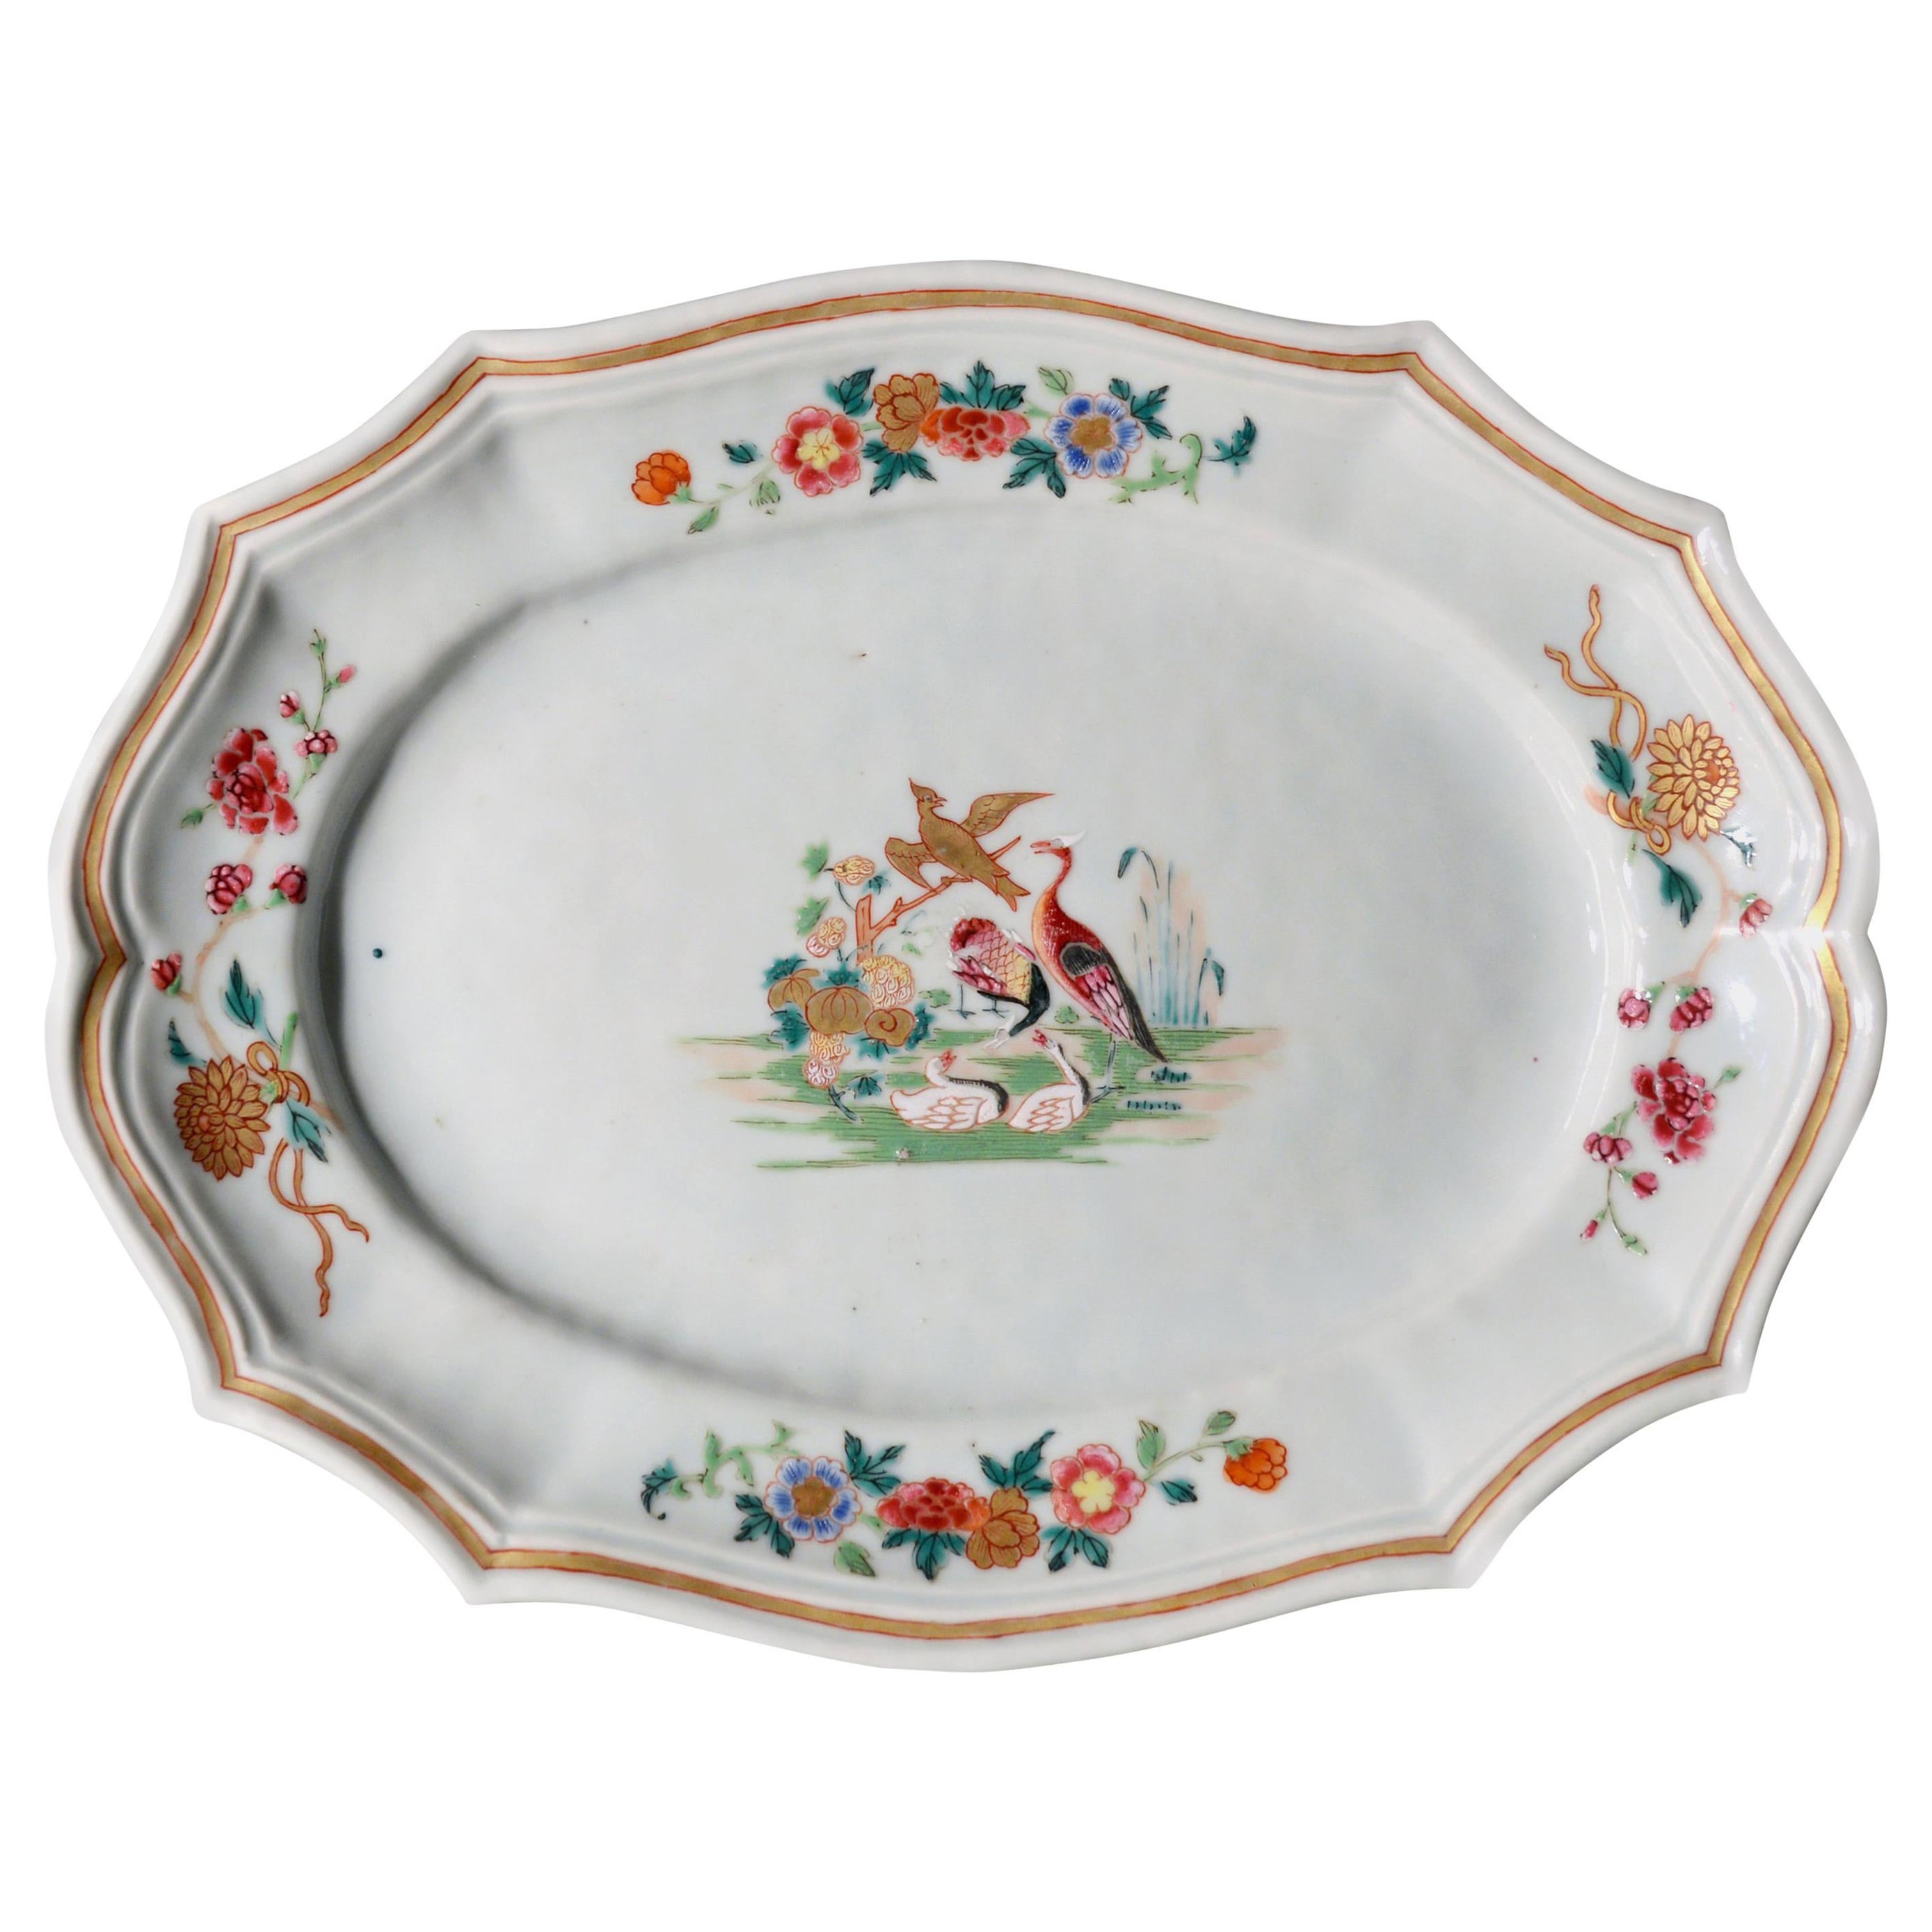 18th Century Chinese Export Porcelain Dish Painted with Birds